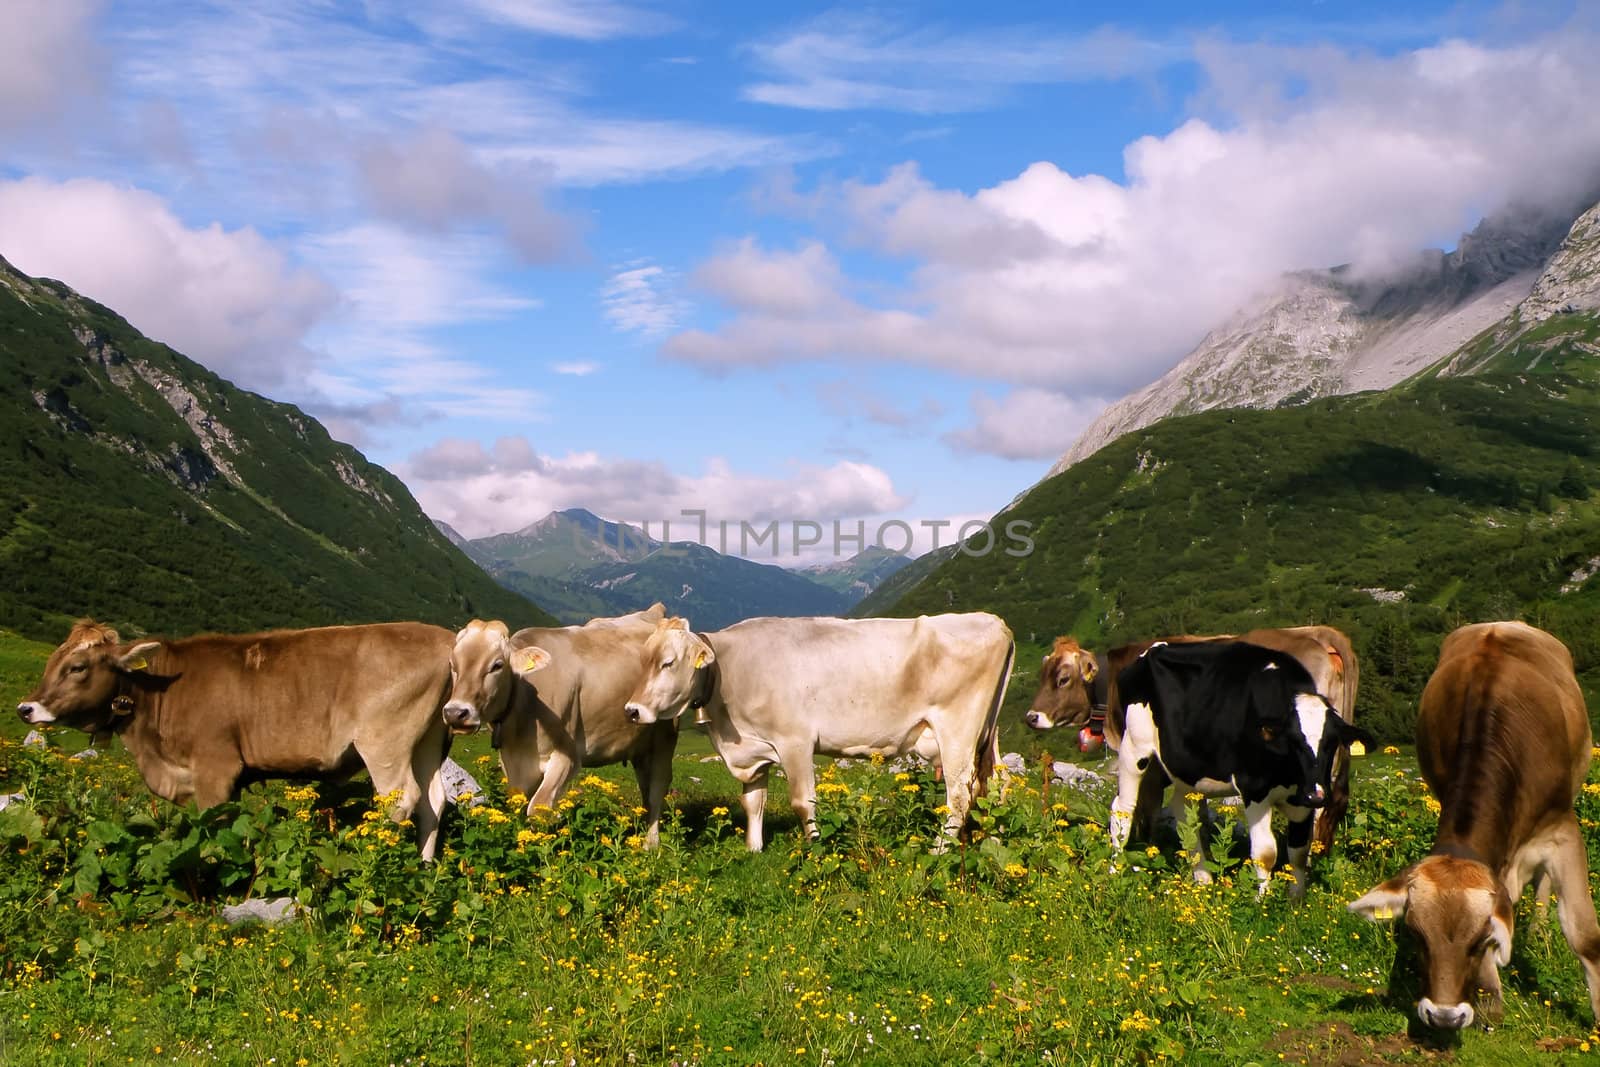 Cow in the meadow of Swiss Alps mountains by martinm303